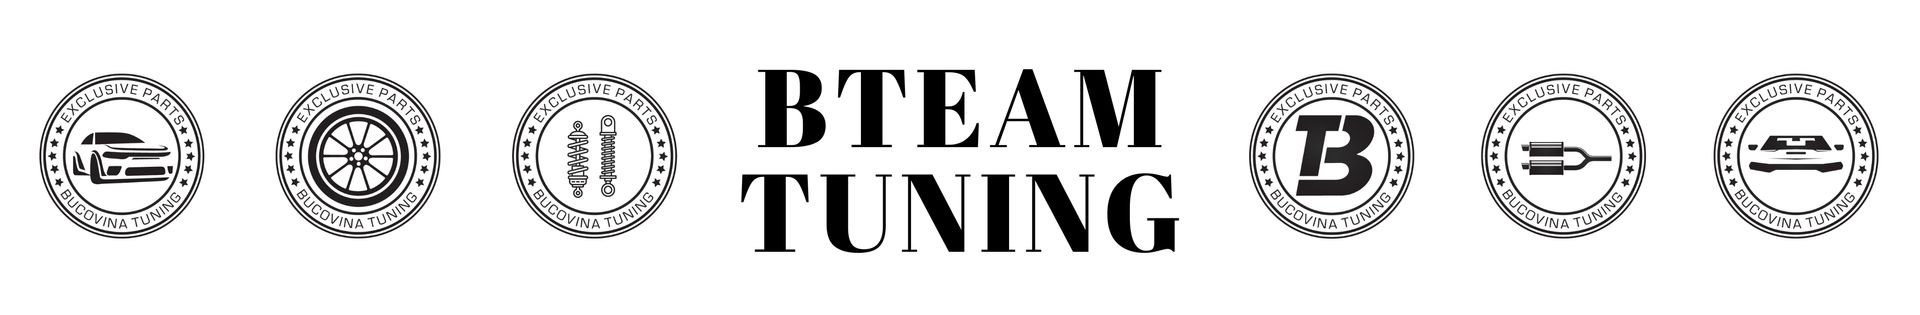 BTEAM TUNING top banner